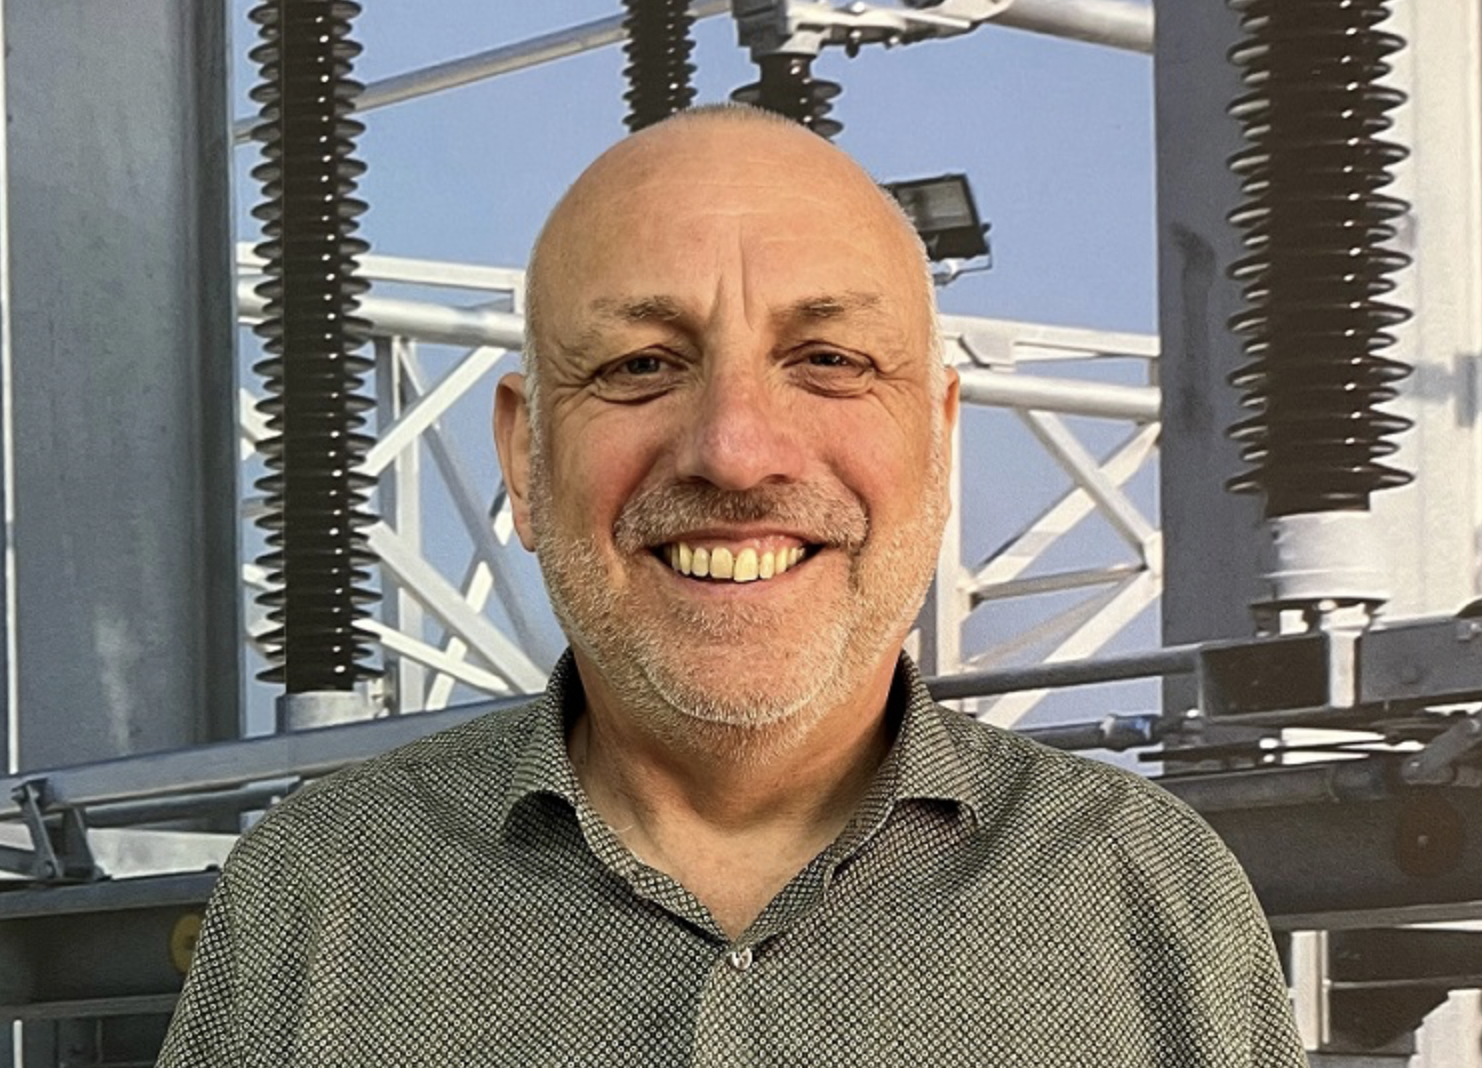 Electrical engineering firm Smith Brothers welcomes operations manager